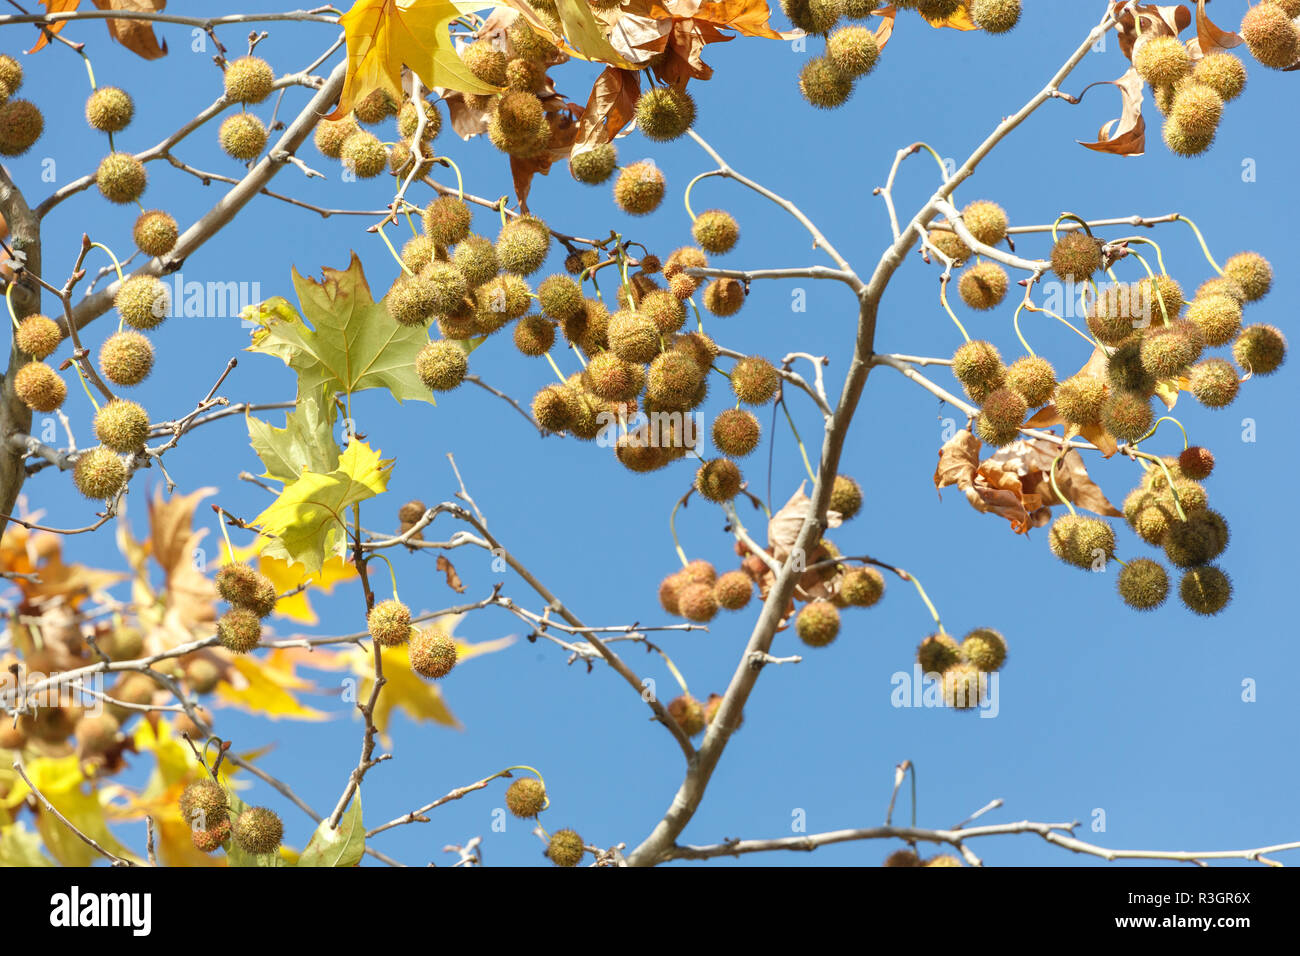 London Plane tree with fruit at Vancouver BC Canada Stock Photo - Alamy